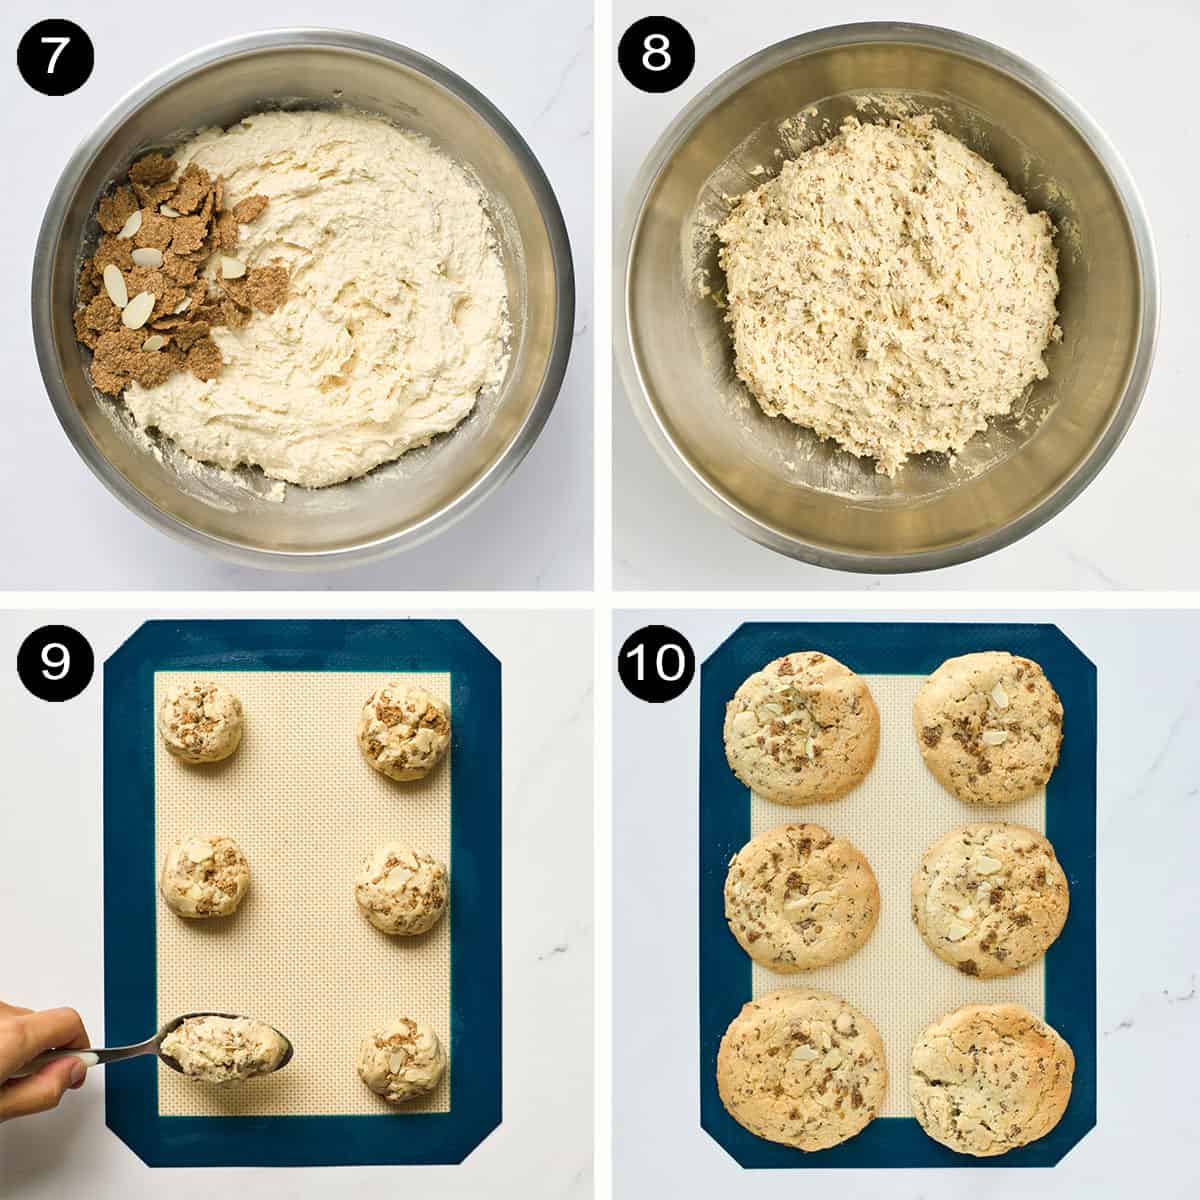 Final steps to make and bake cookies.